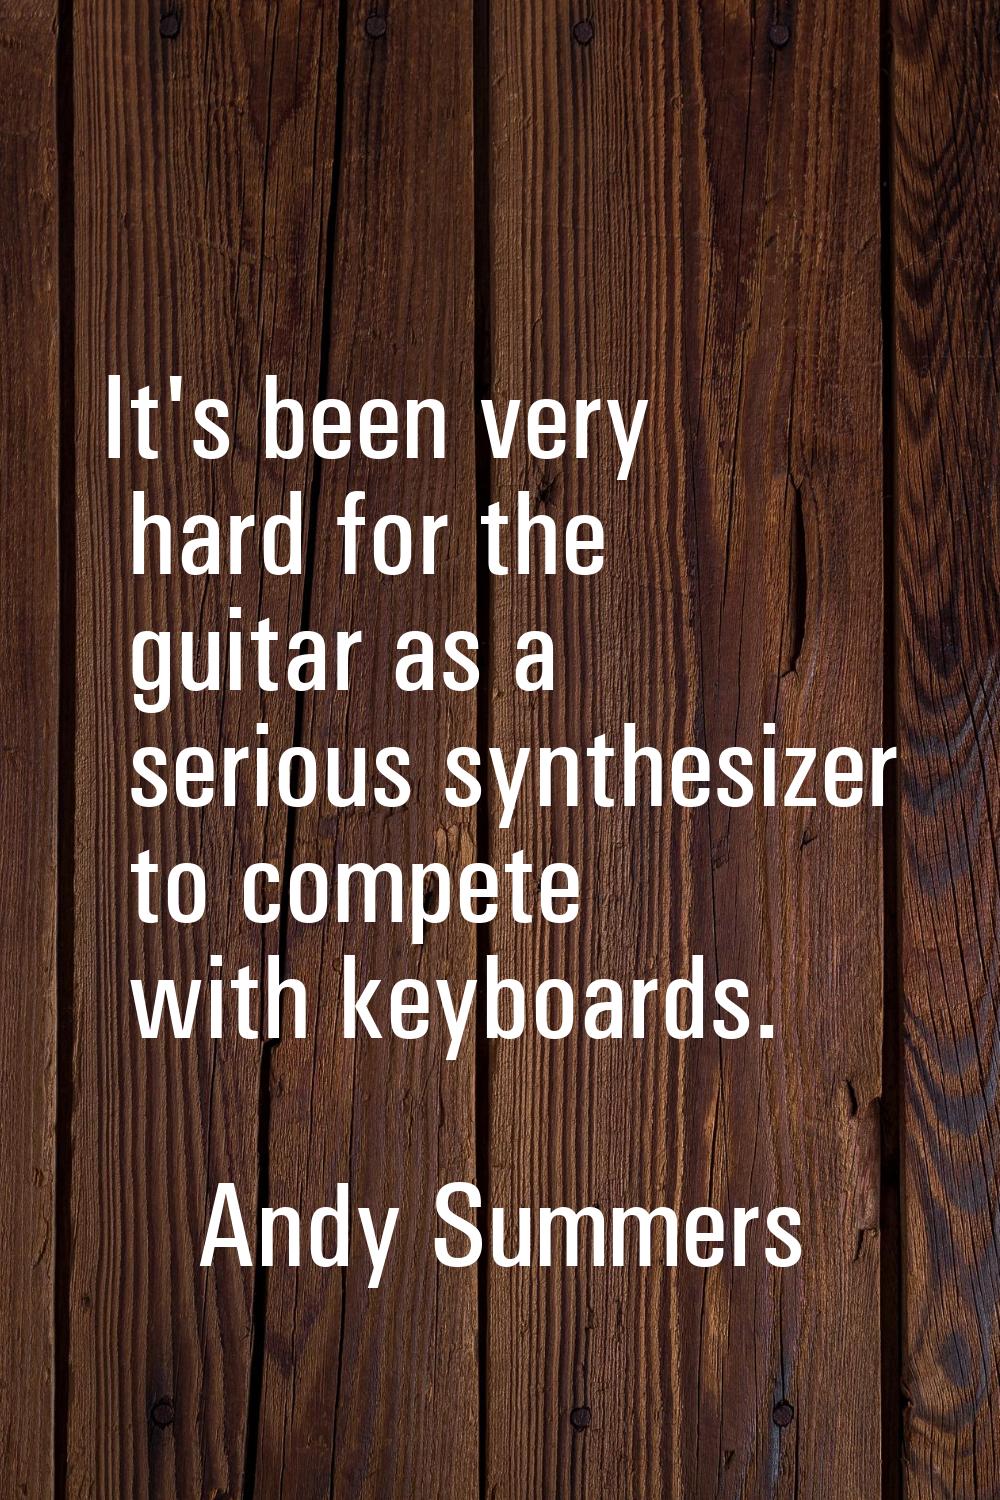 It's been very hard for the guitar as a serious synthesizer to compete with keyboards.